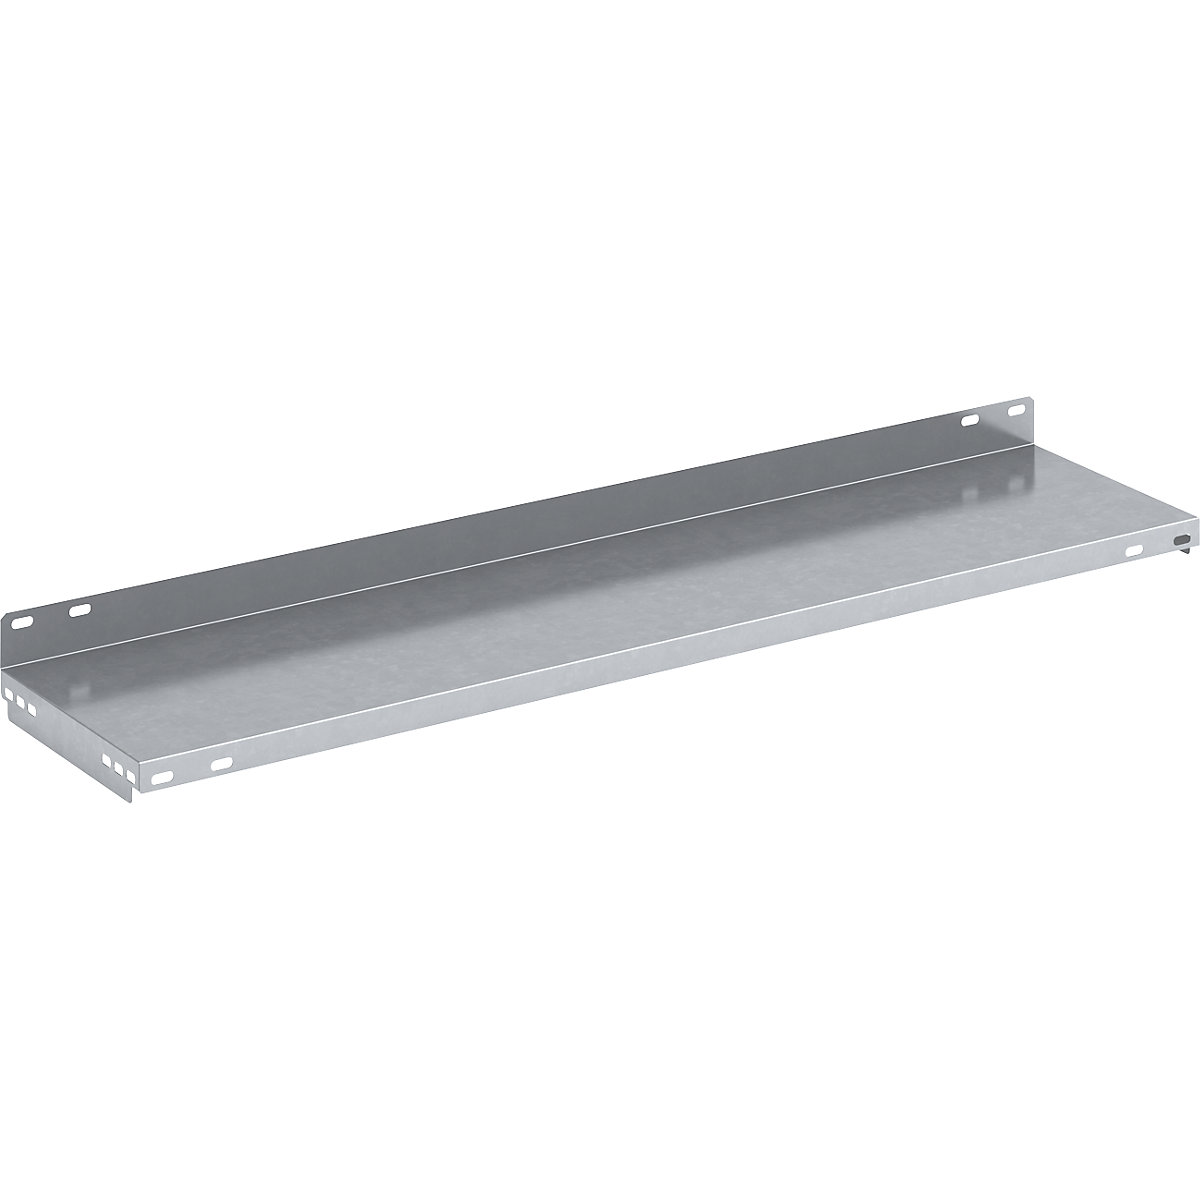 Shelf with supports - hofe